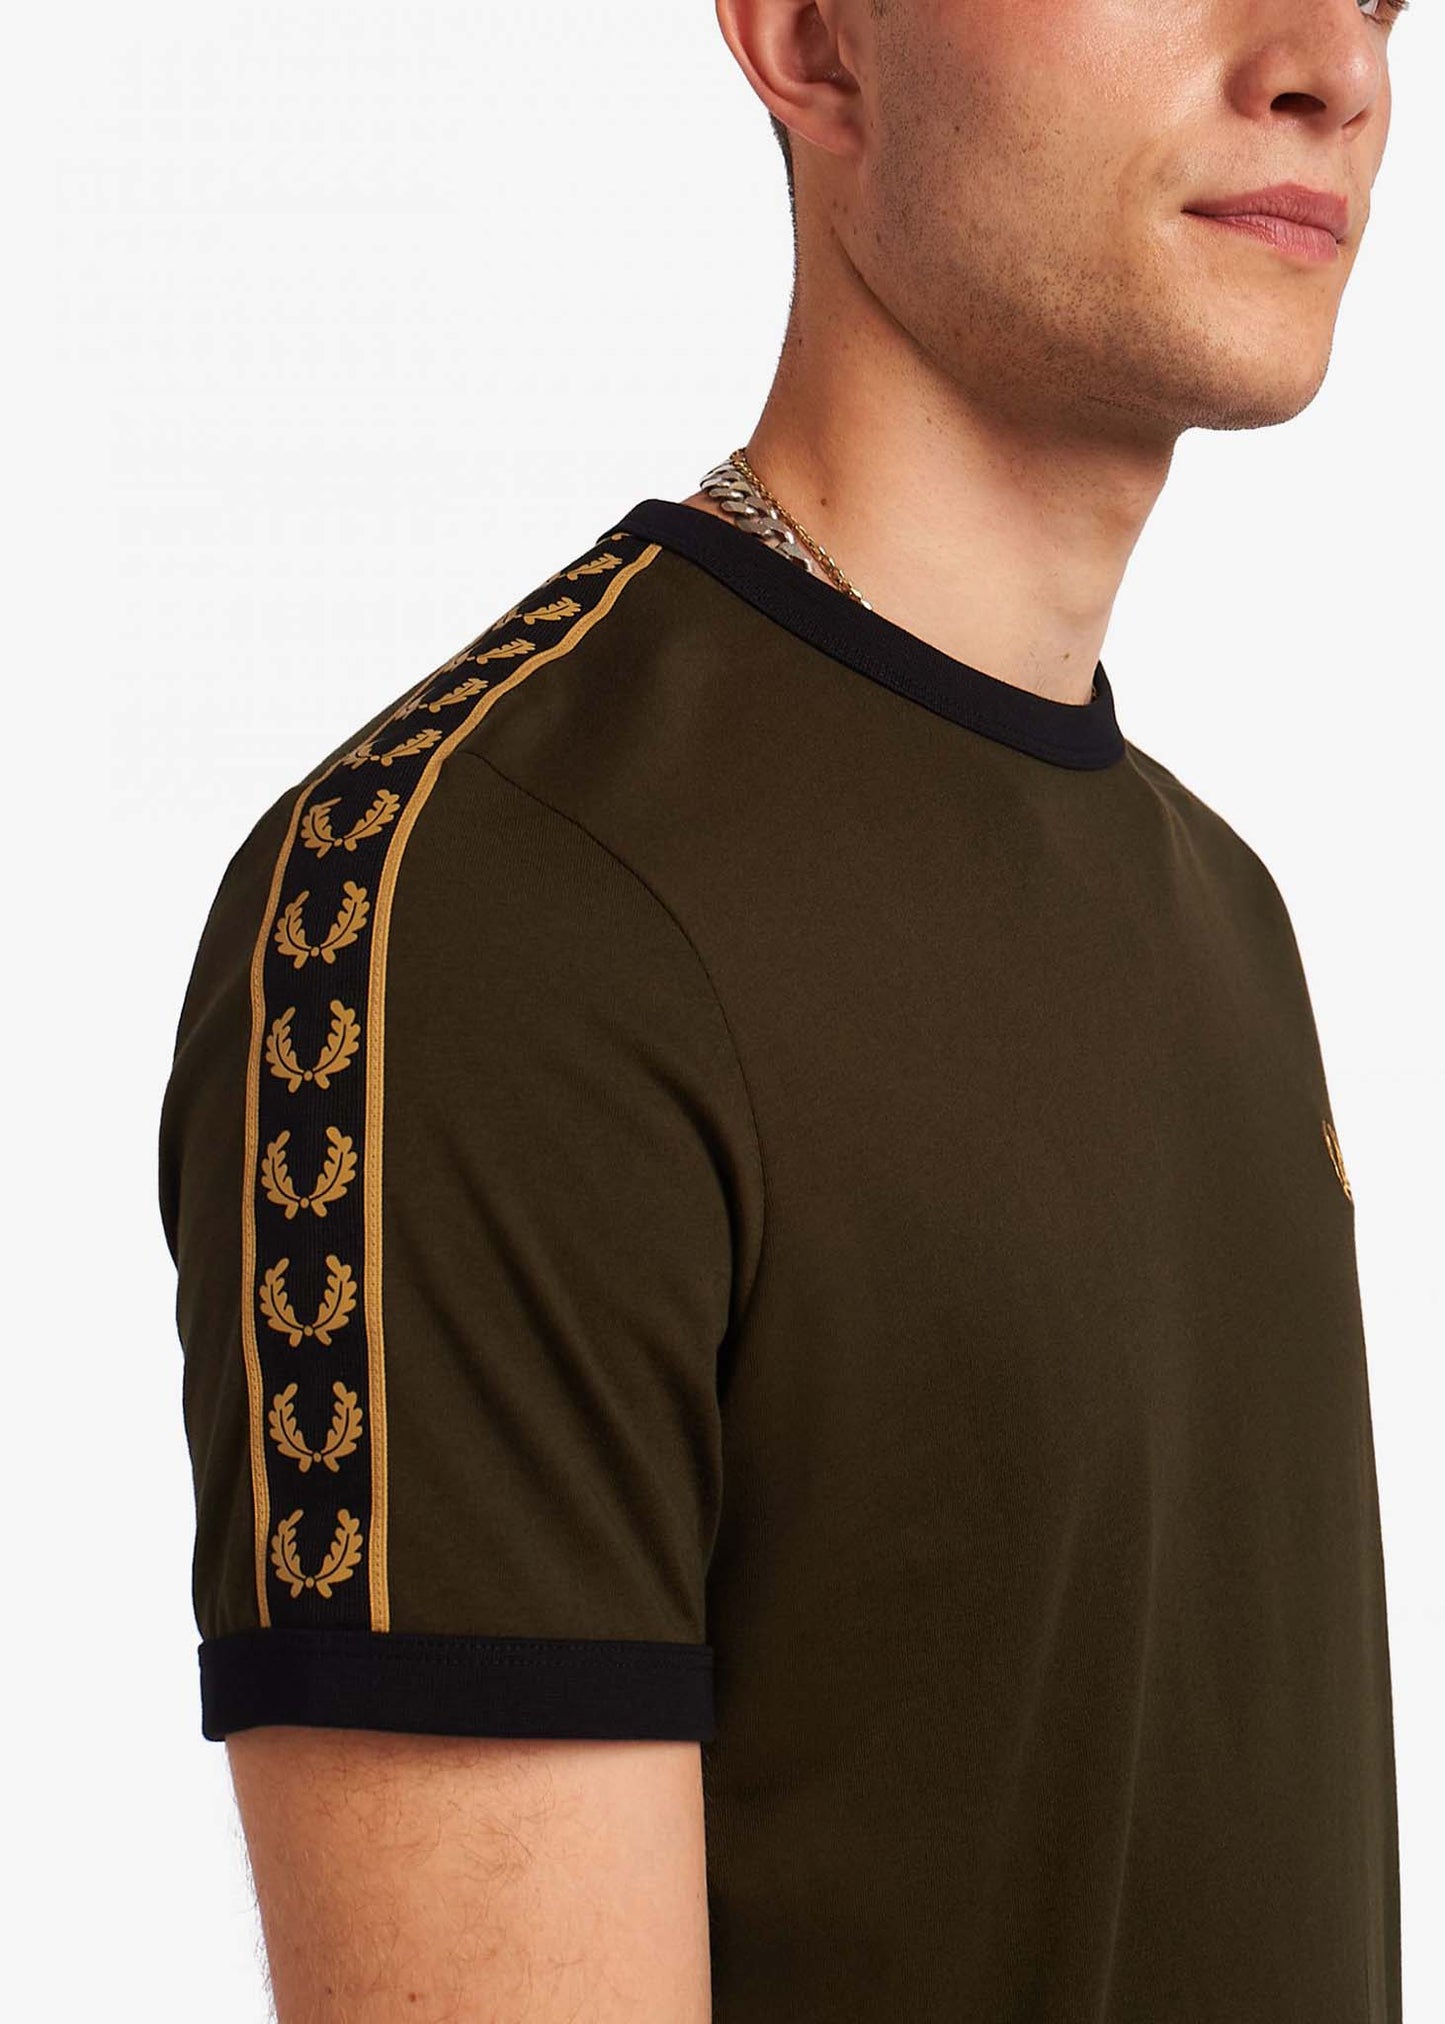 Fred Perry T-shirts  Gold taped ringer t-shirt - hunting green 